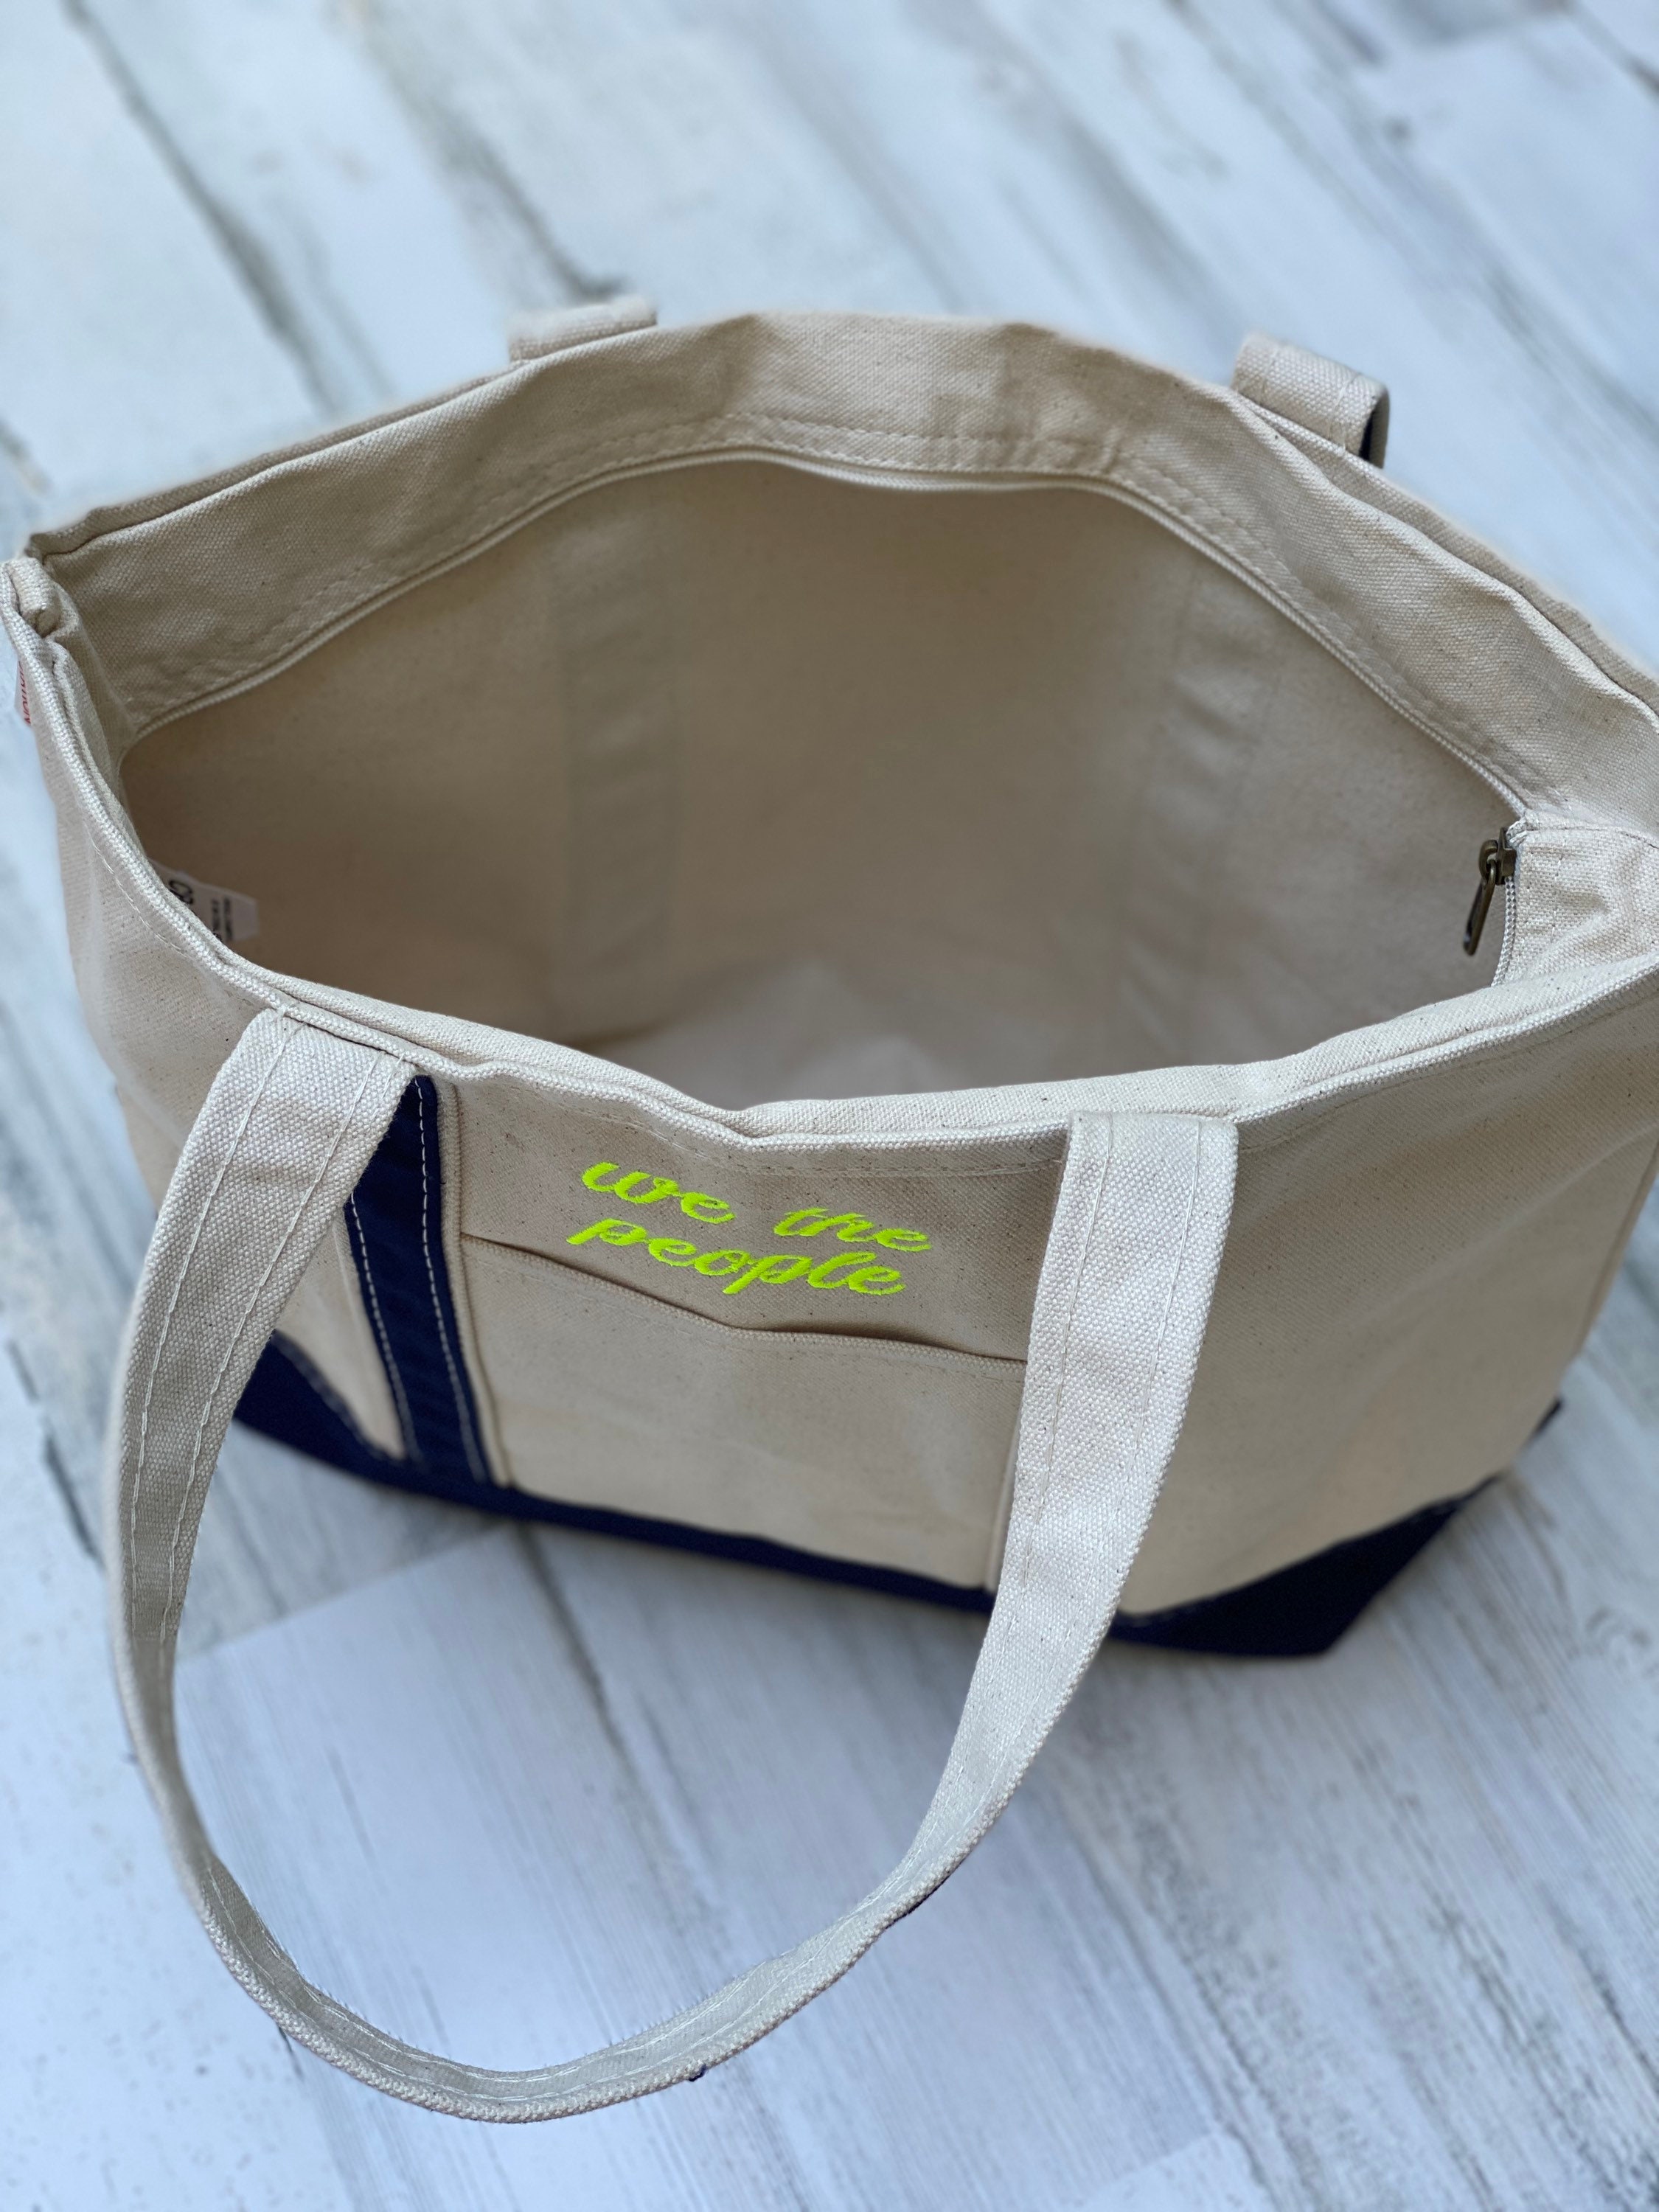 Budget-Friendly, Classic Luggage: L.L. Bean Boat and Tote Review 2023 -  C'est Bien by Heather Bien